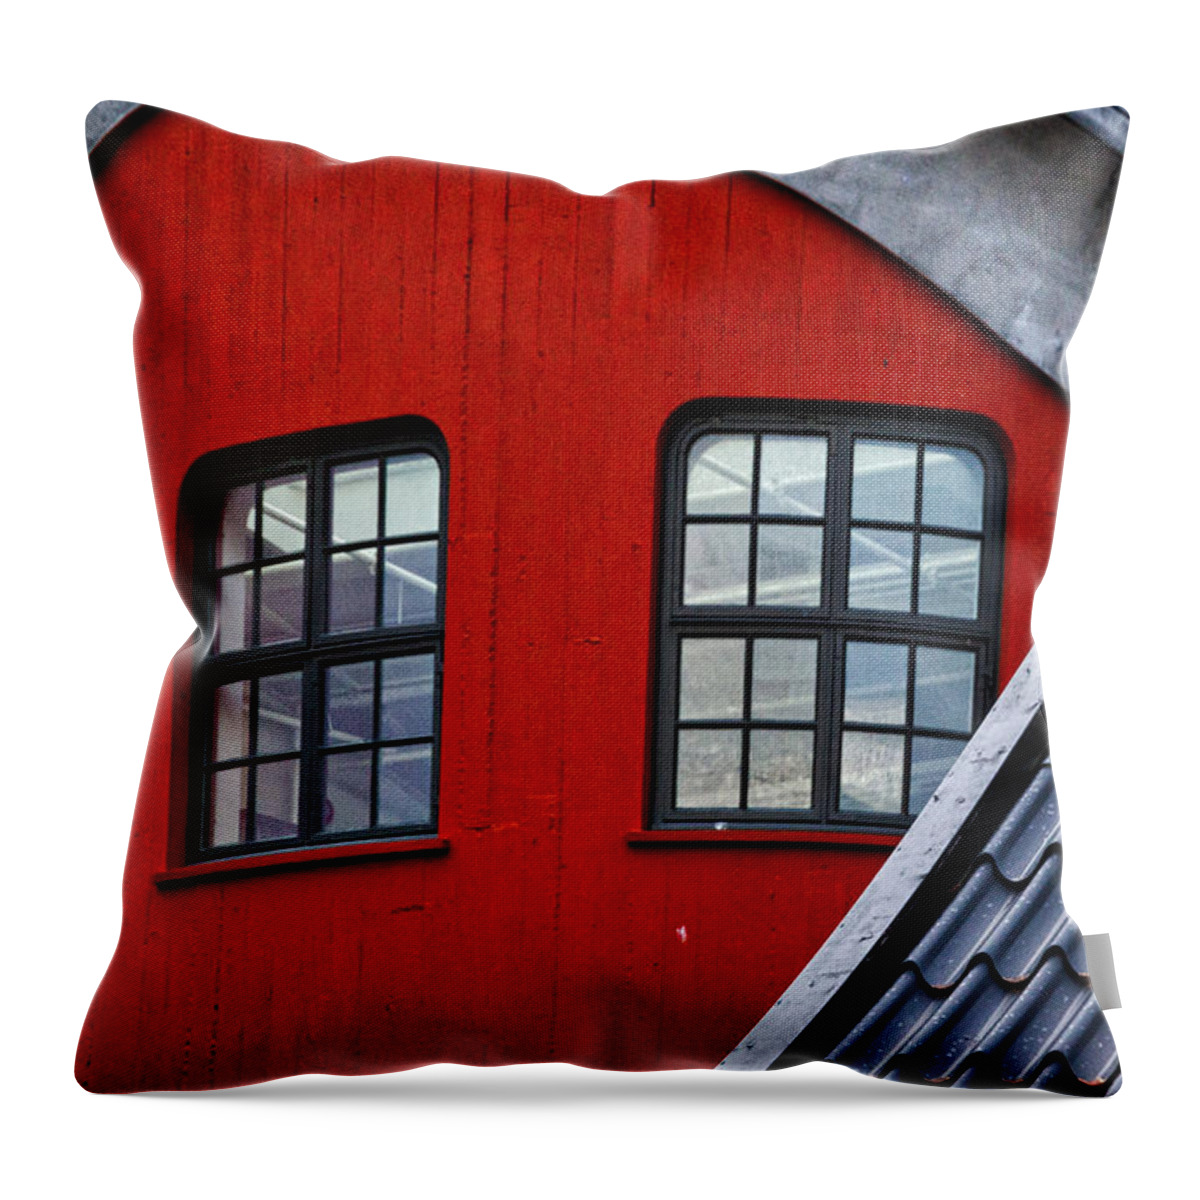 Reykjavik Throw Pillow featuring the photograph Reykjavik Architecture - Iceland by Stuart Litoff